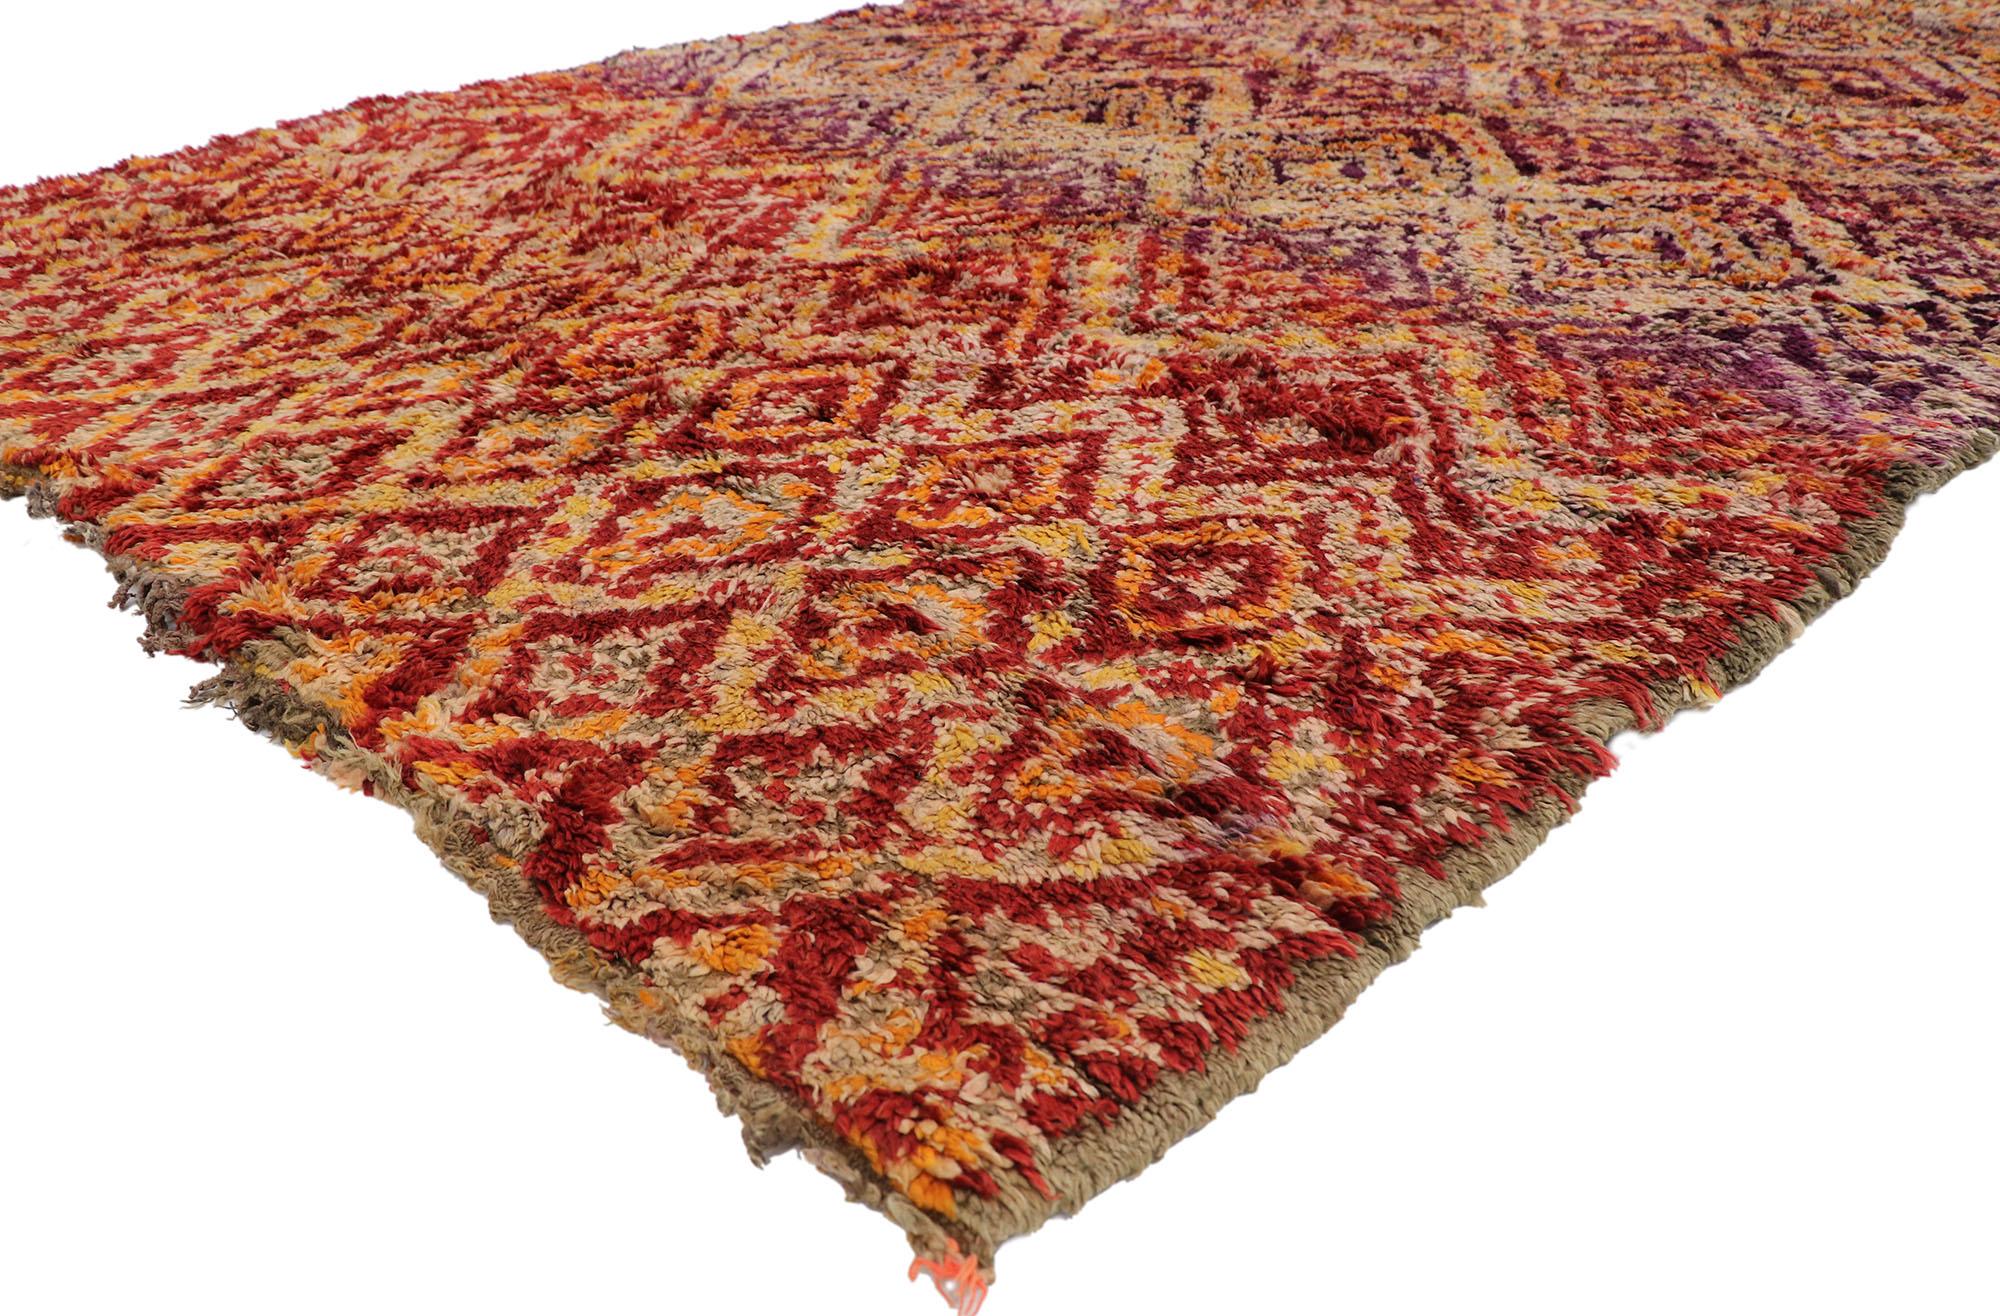 21201 vintage Berber Beni M'Guild Moroccan rug with Mid-Century Modern Tribal style 06'10 x 12'02. Saturated in good taste and rich abrash, this hand knotted wool vintage Berber Beni M'Guild Moroccan rug is a captivating vision of woven beauty. The